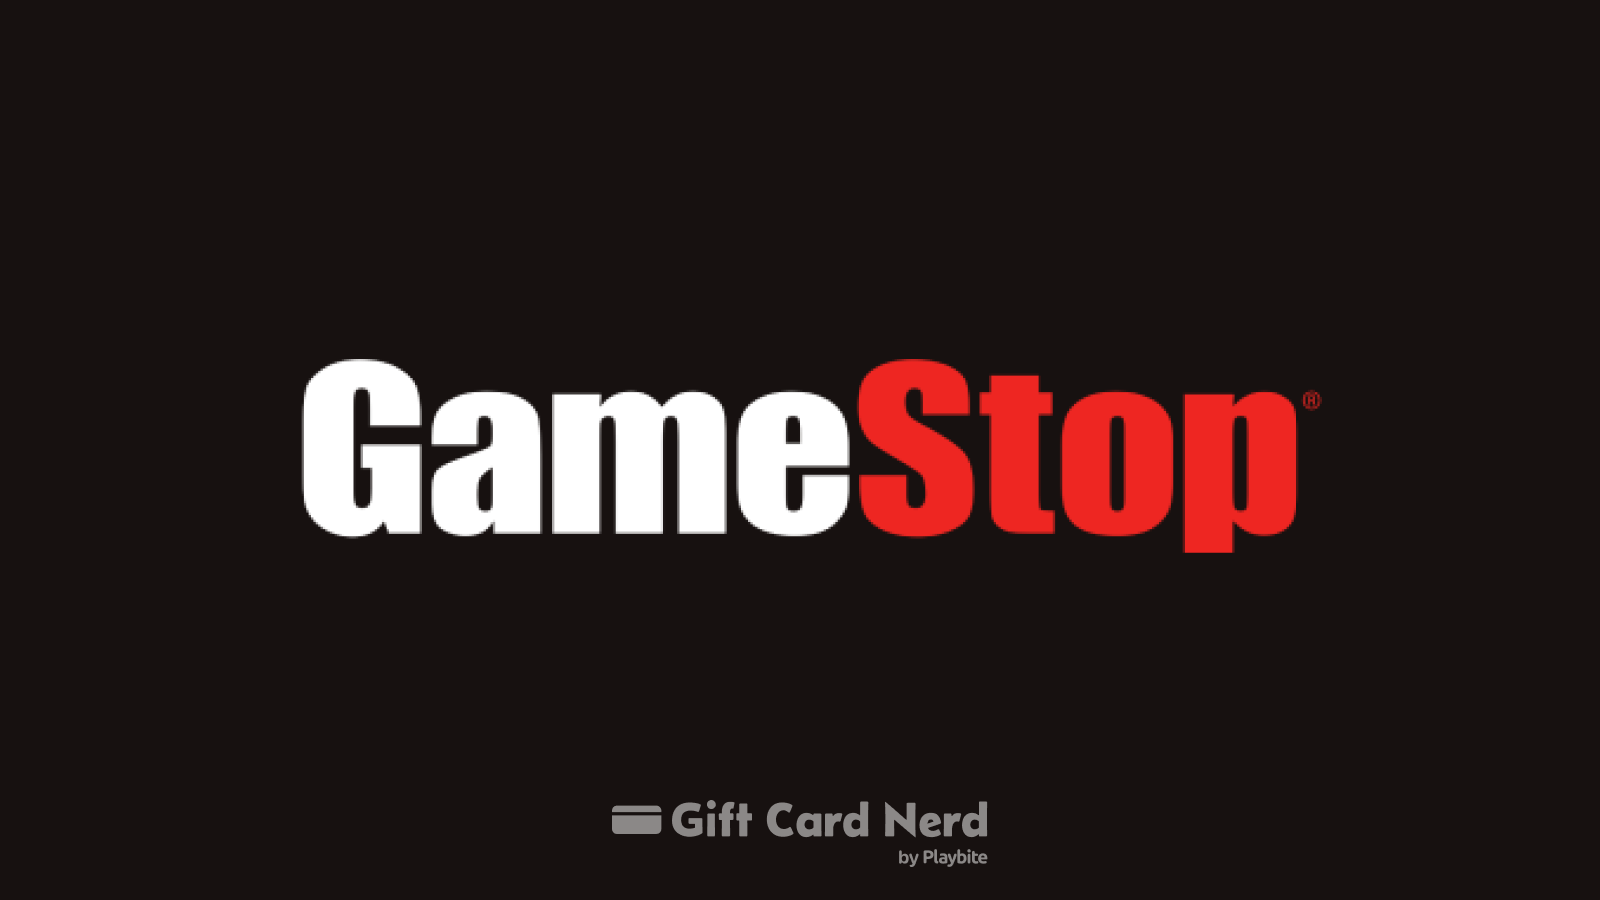 Does Amazon Sell Game Stop Gift Cards?